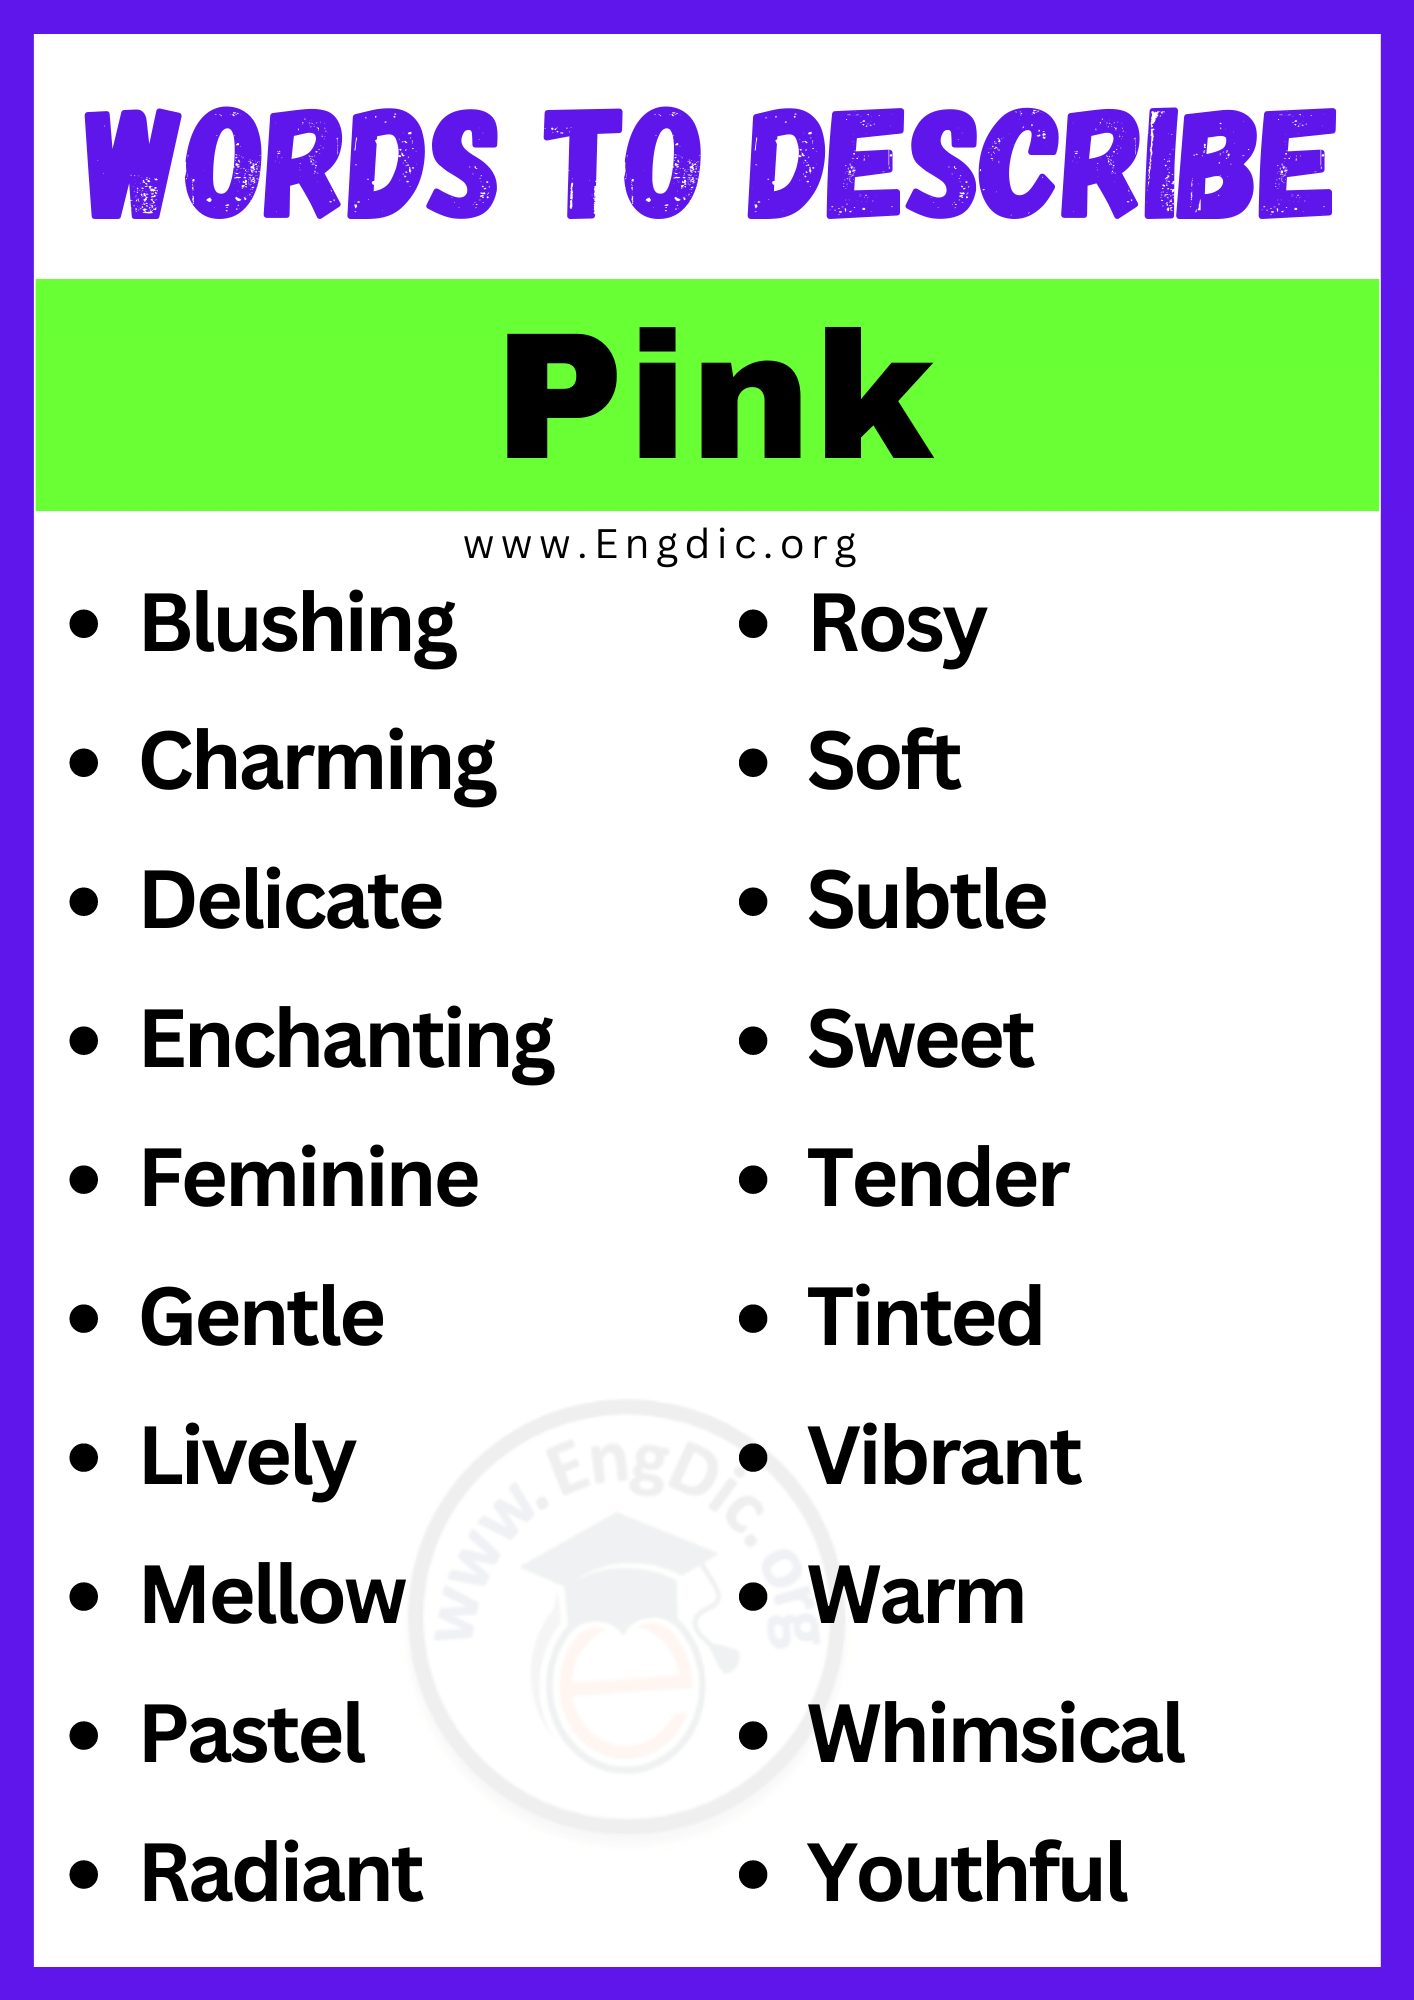 Words to Describe Pink